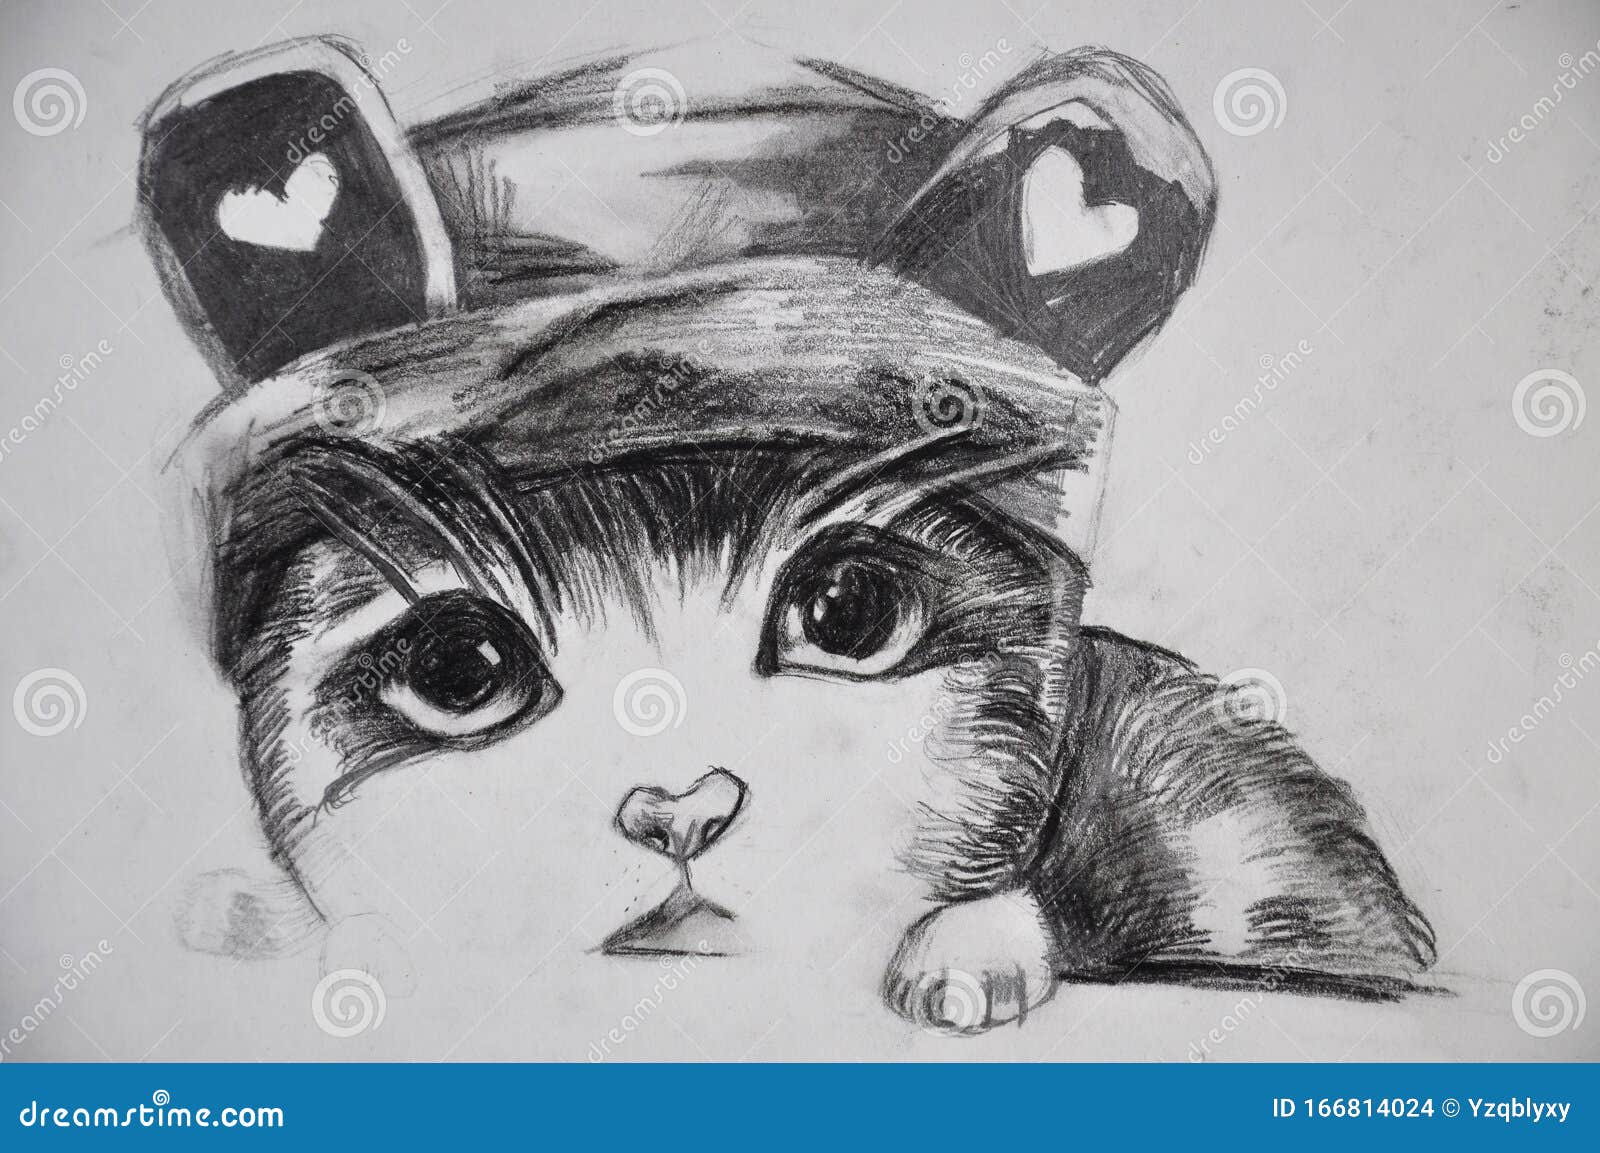 35+ Cat Pencil Drawing Pictures